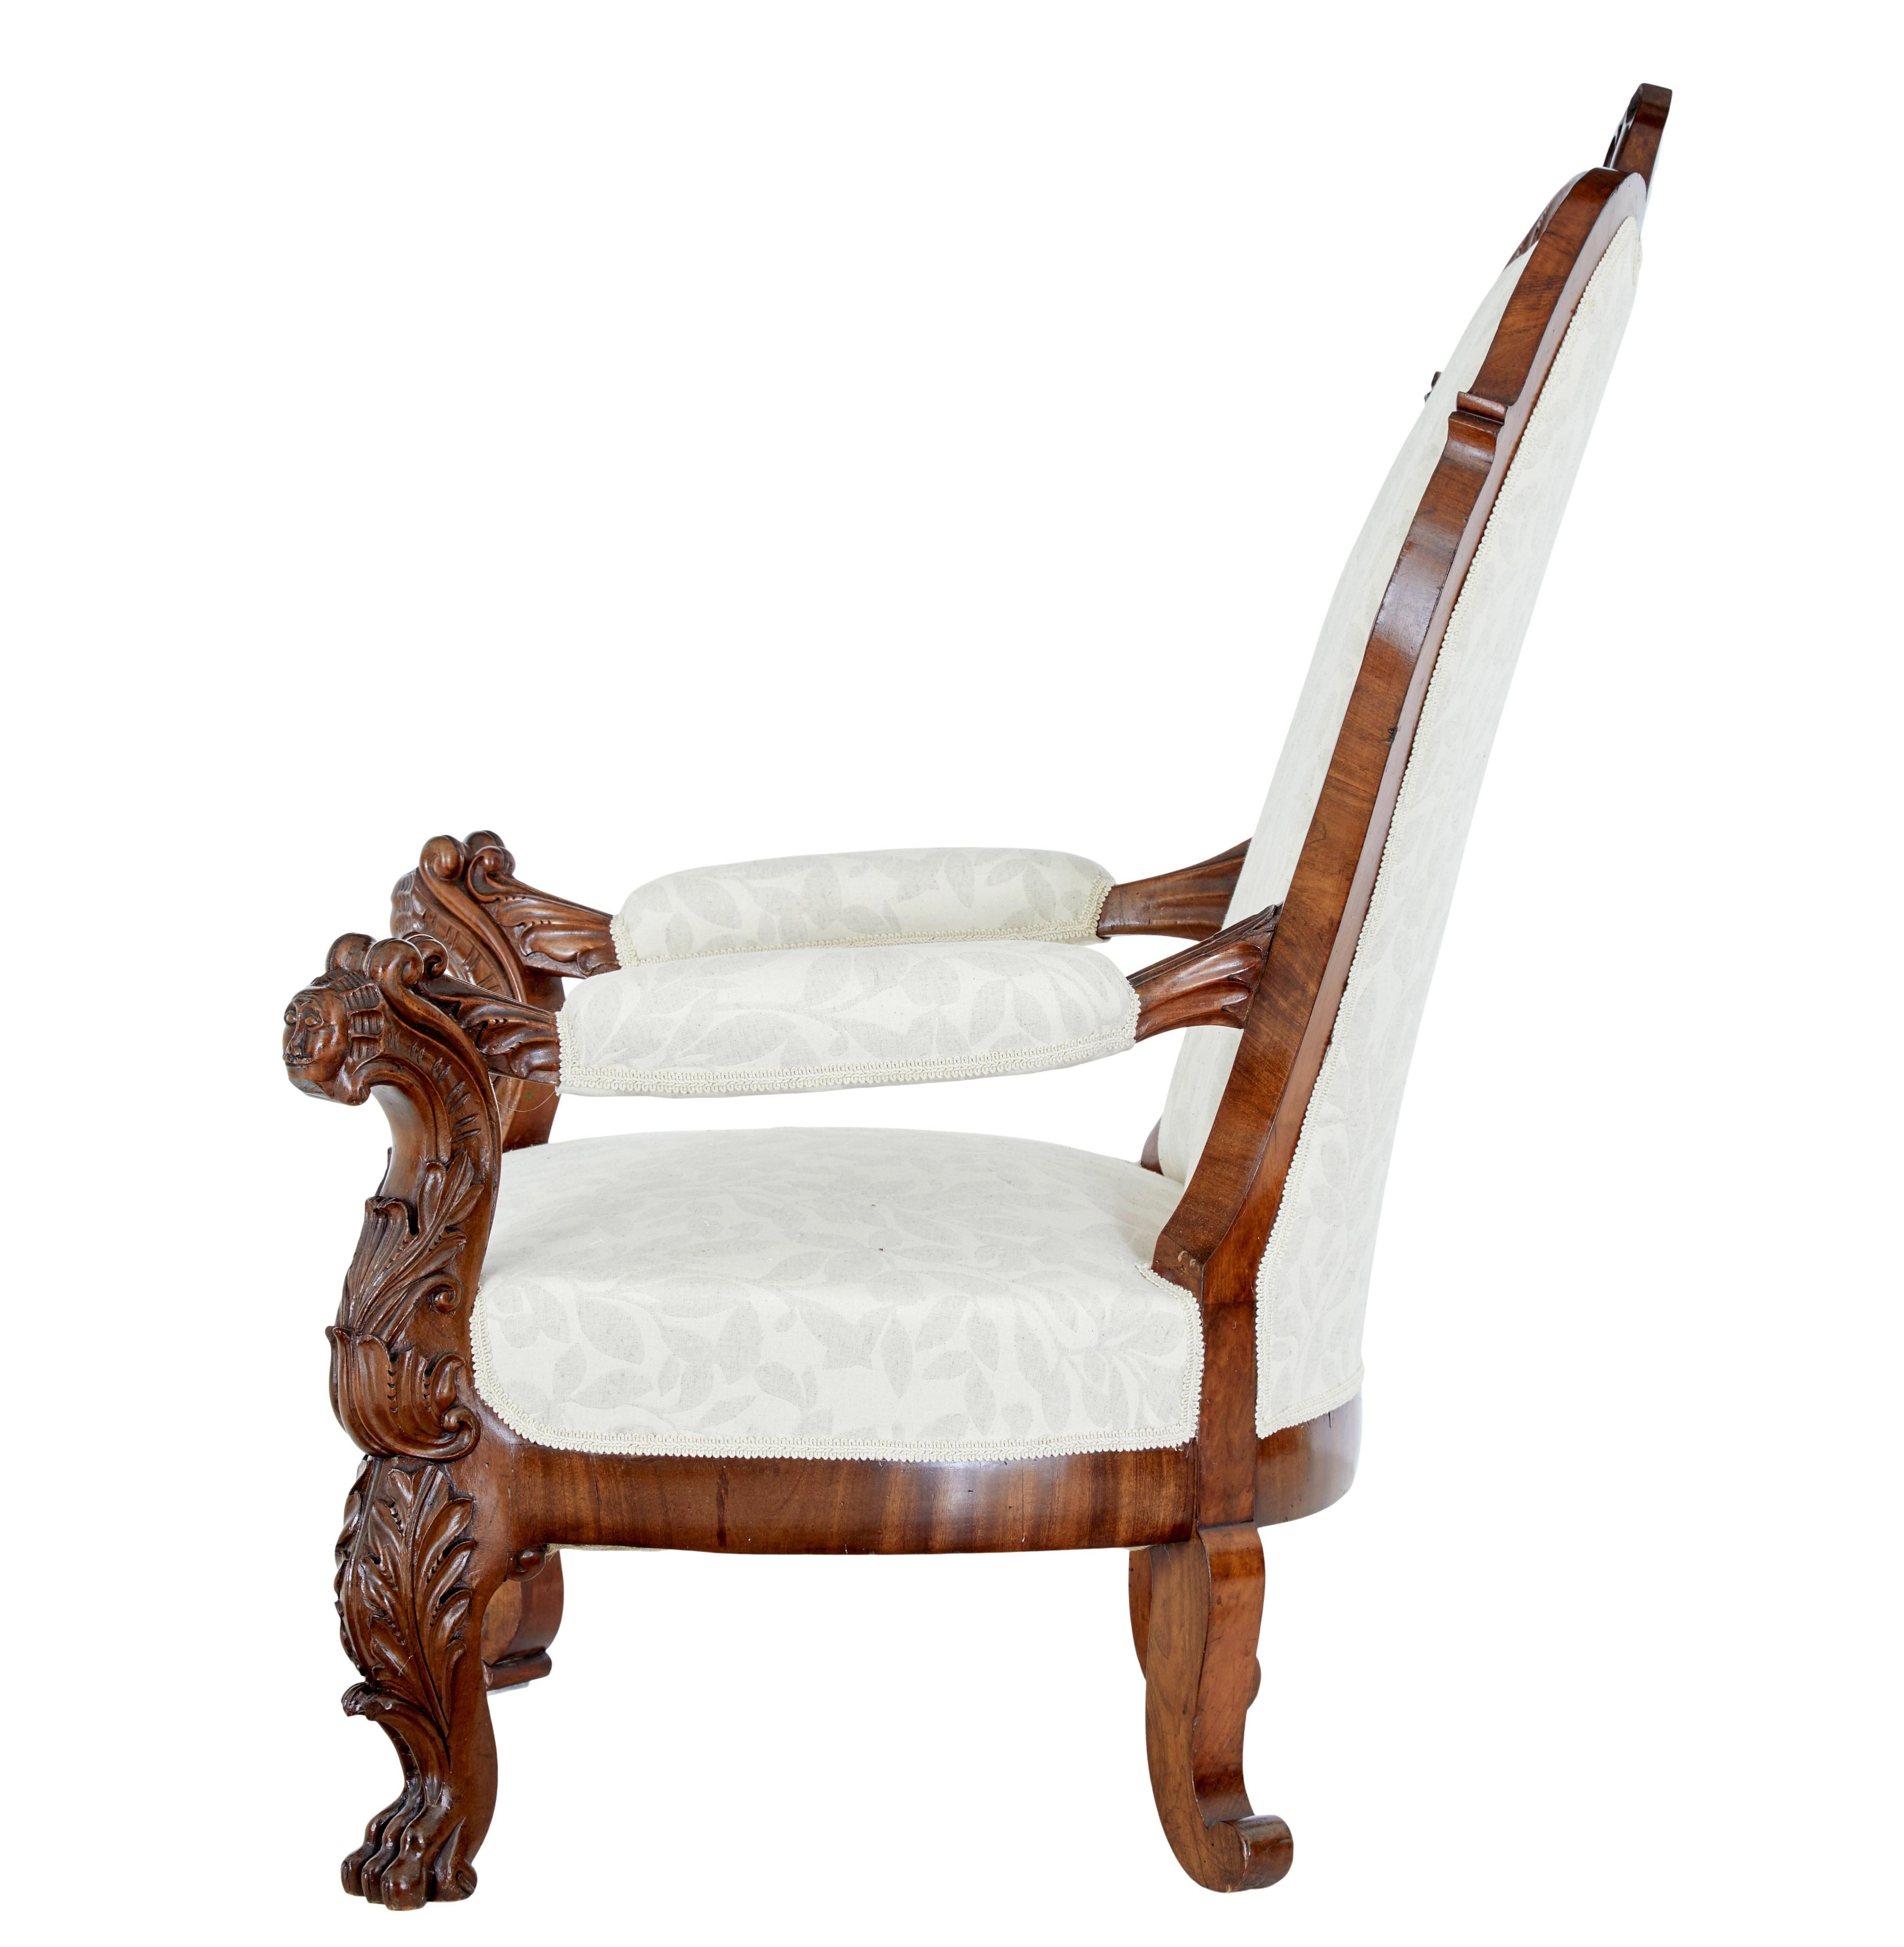 Mid 19th century carved walnut armchair circa 1860.

Fine quality profusely carved solid walnut armchair from the high victorian period.

Cartouche shaped back with carved acanthus leaves and scrolls, which lead down the the padded arms.  Arms